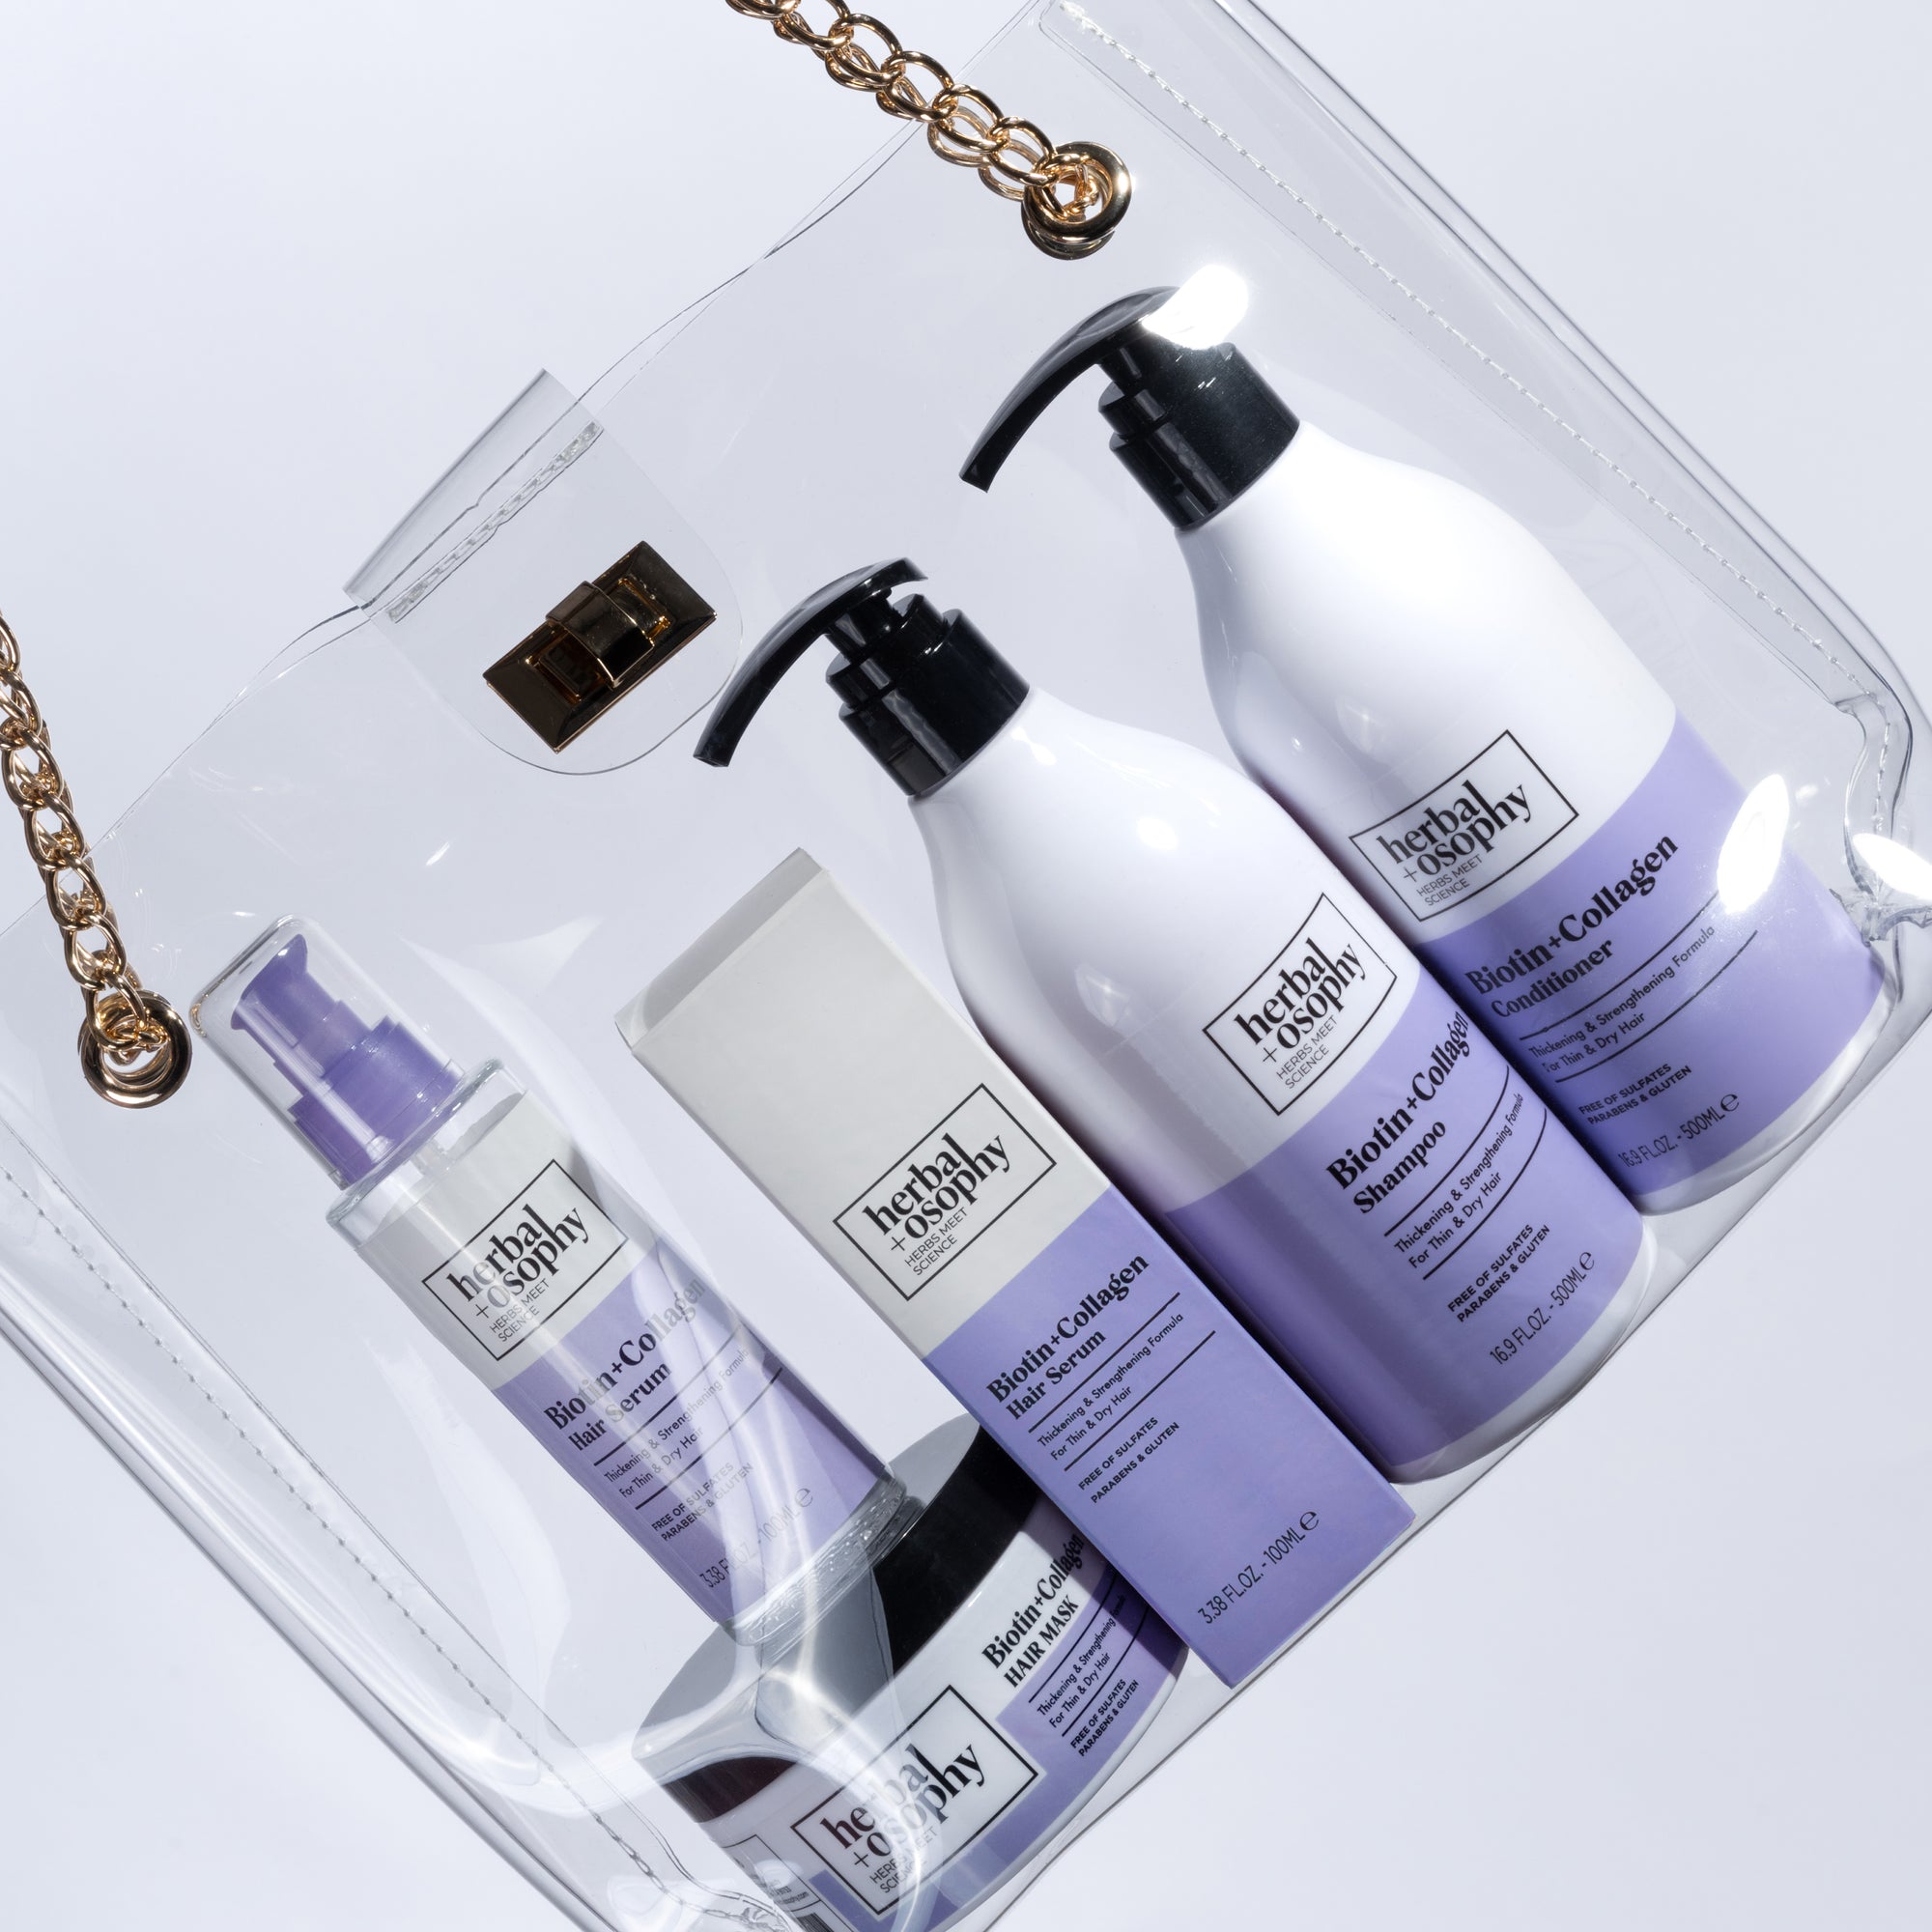 Herbalosophy Biotin + Collagen hair care series of products in a clear handbag